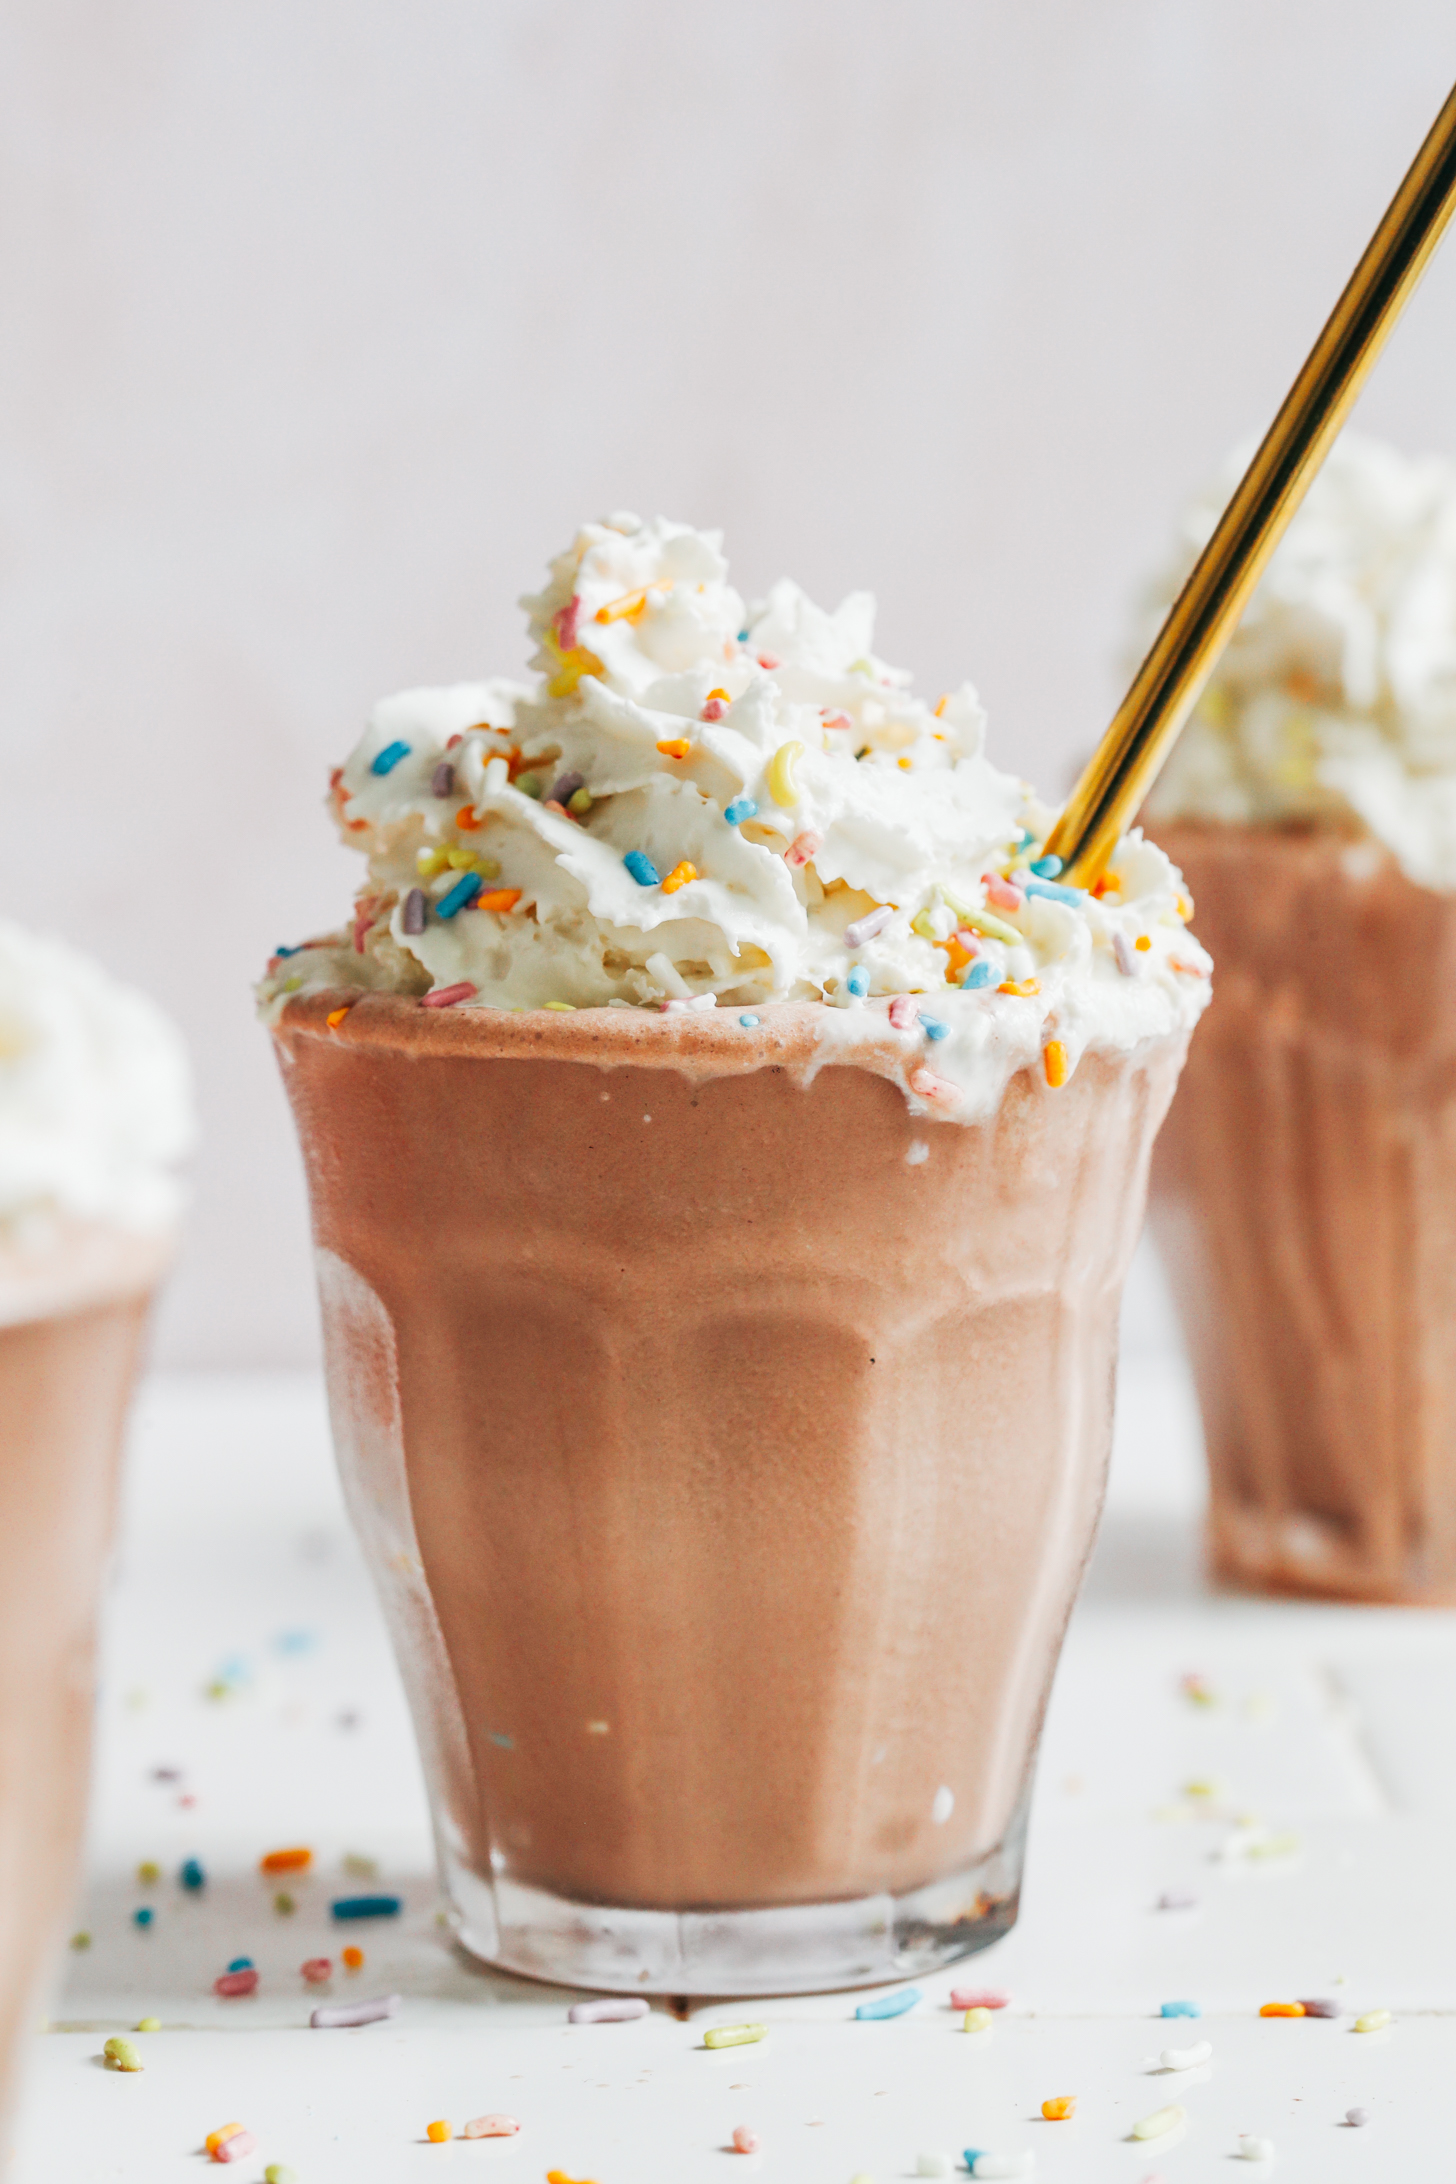 Glass of our thick and creamy vegan chocolate milkshake topped with dairy-free whipped cream and sprinkles